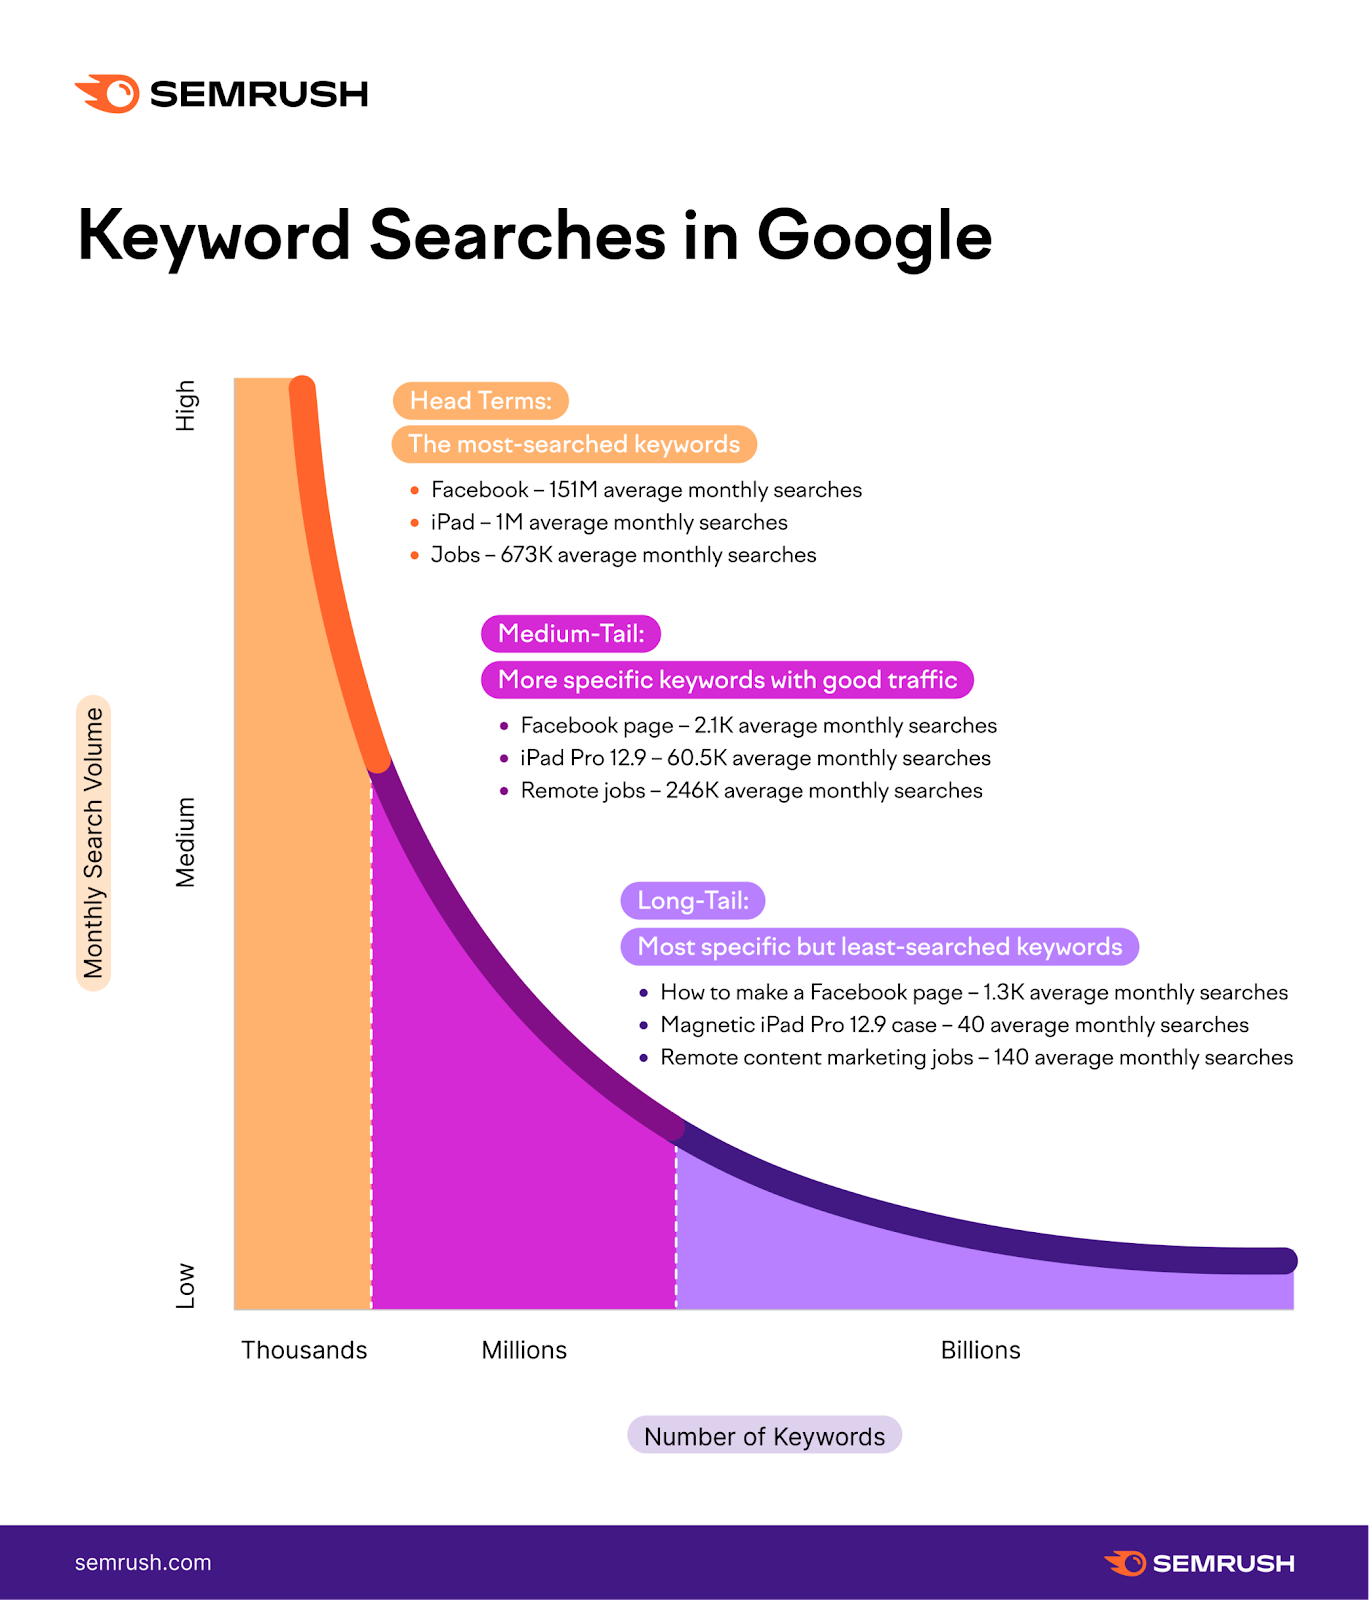 a graph with monthly search volume and number of keywords shows that long-tail keywords make up the vast majority of all Google searches